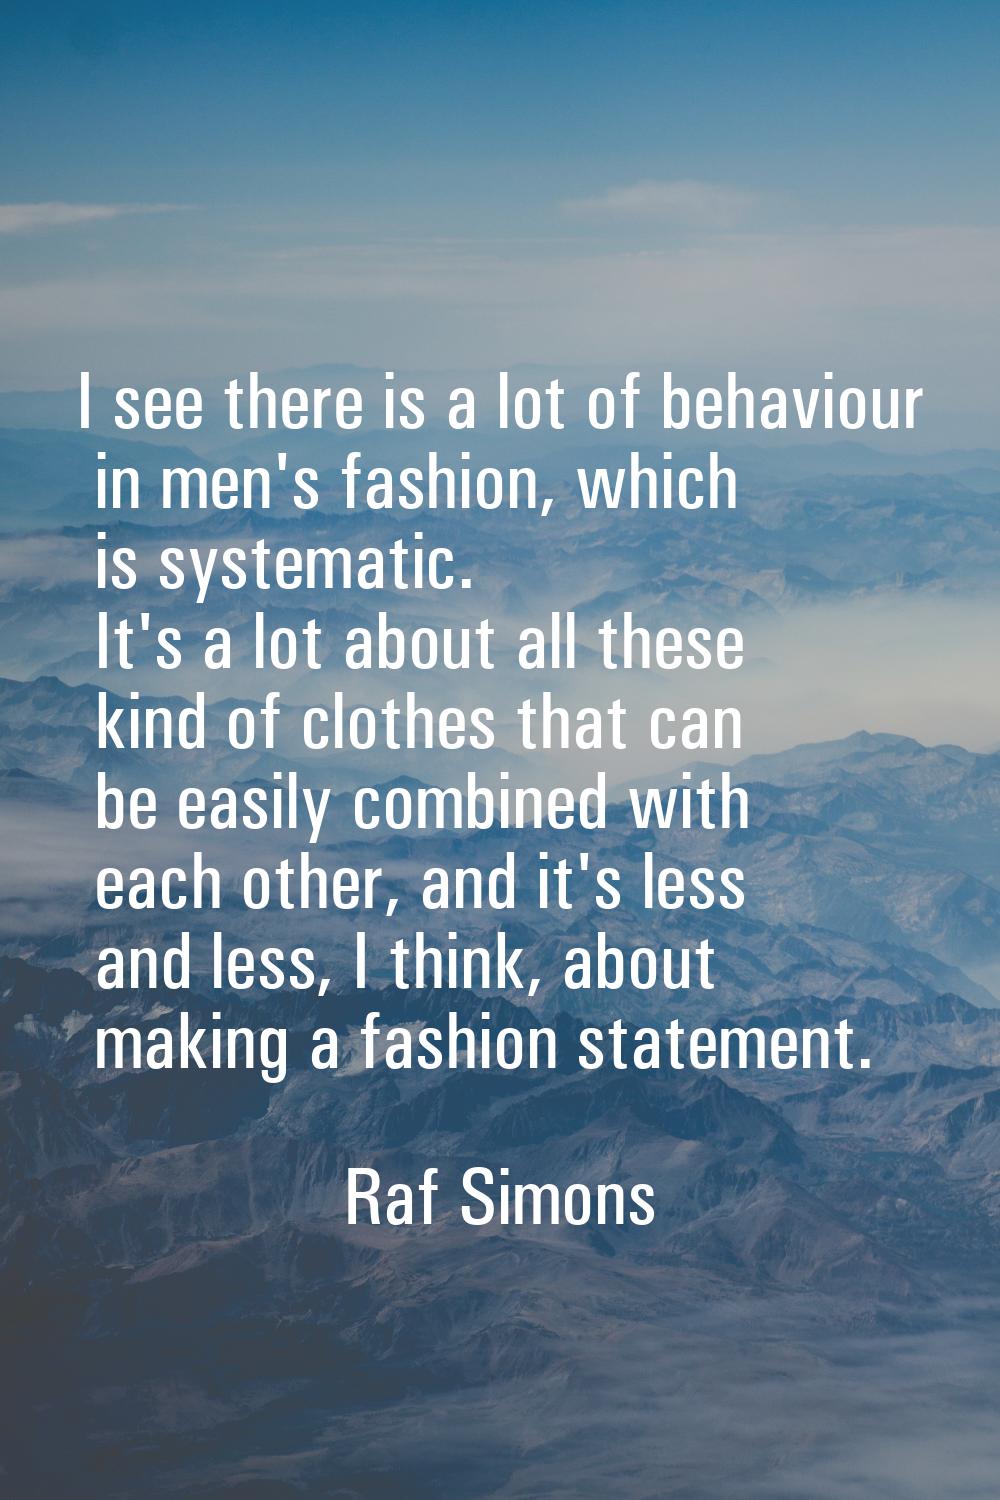 I see there is a lot of behaviour in men's fashion, which is systematic. It's a lot about all these